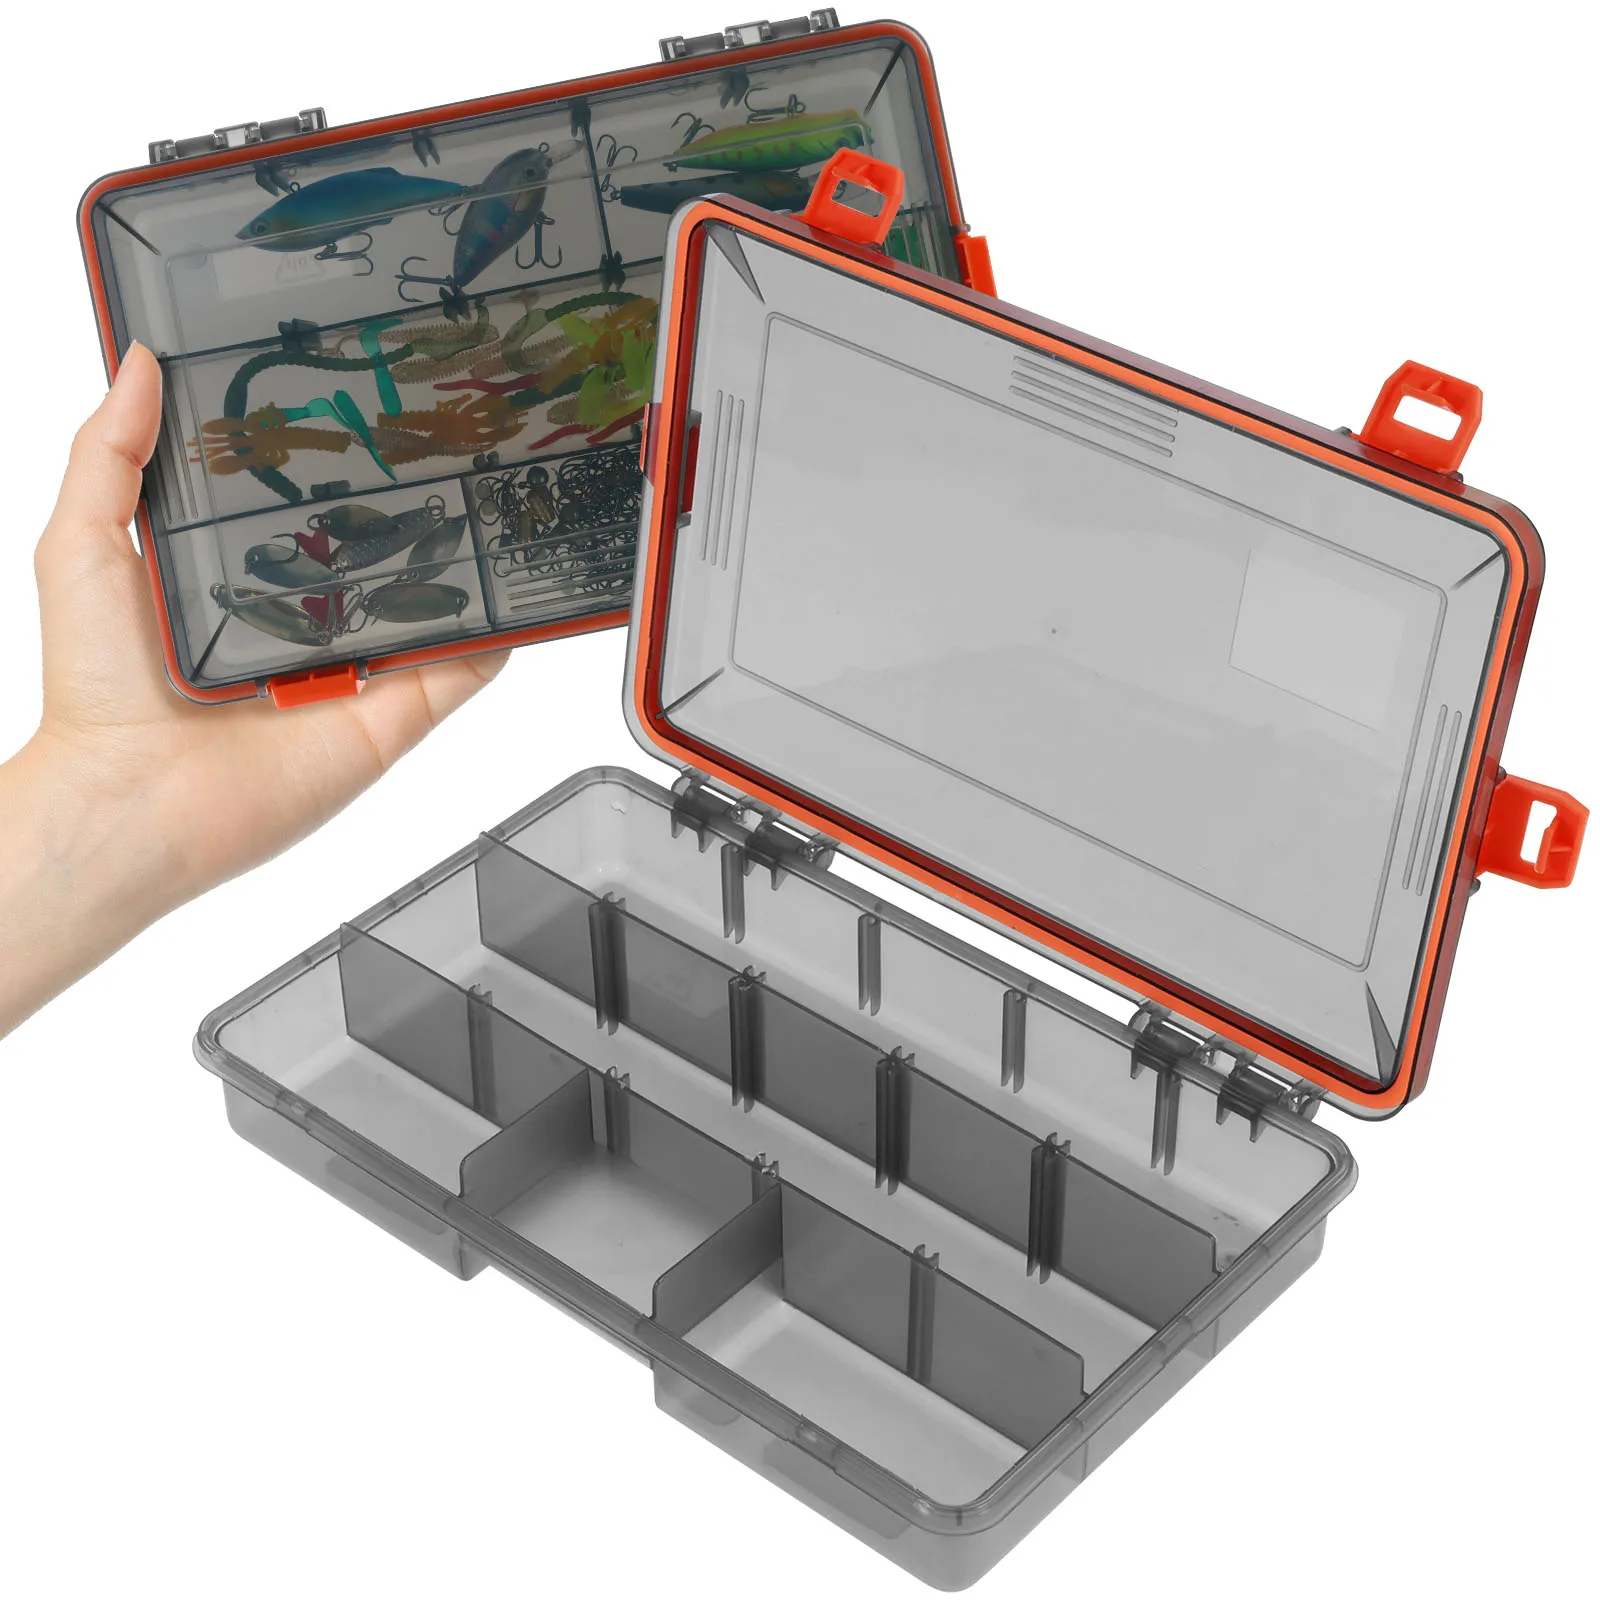 

2Pcs Waterproof Tackle Box Portable Fishing Tackle Organizer Multifunctional Lure Storage Box with Dividers Plastic Tackle Tray